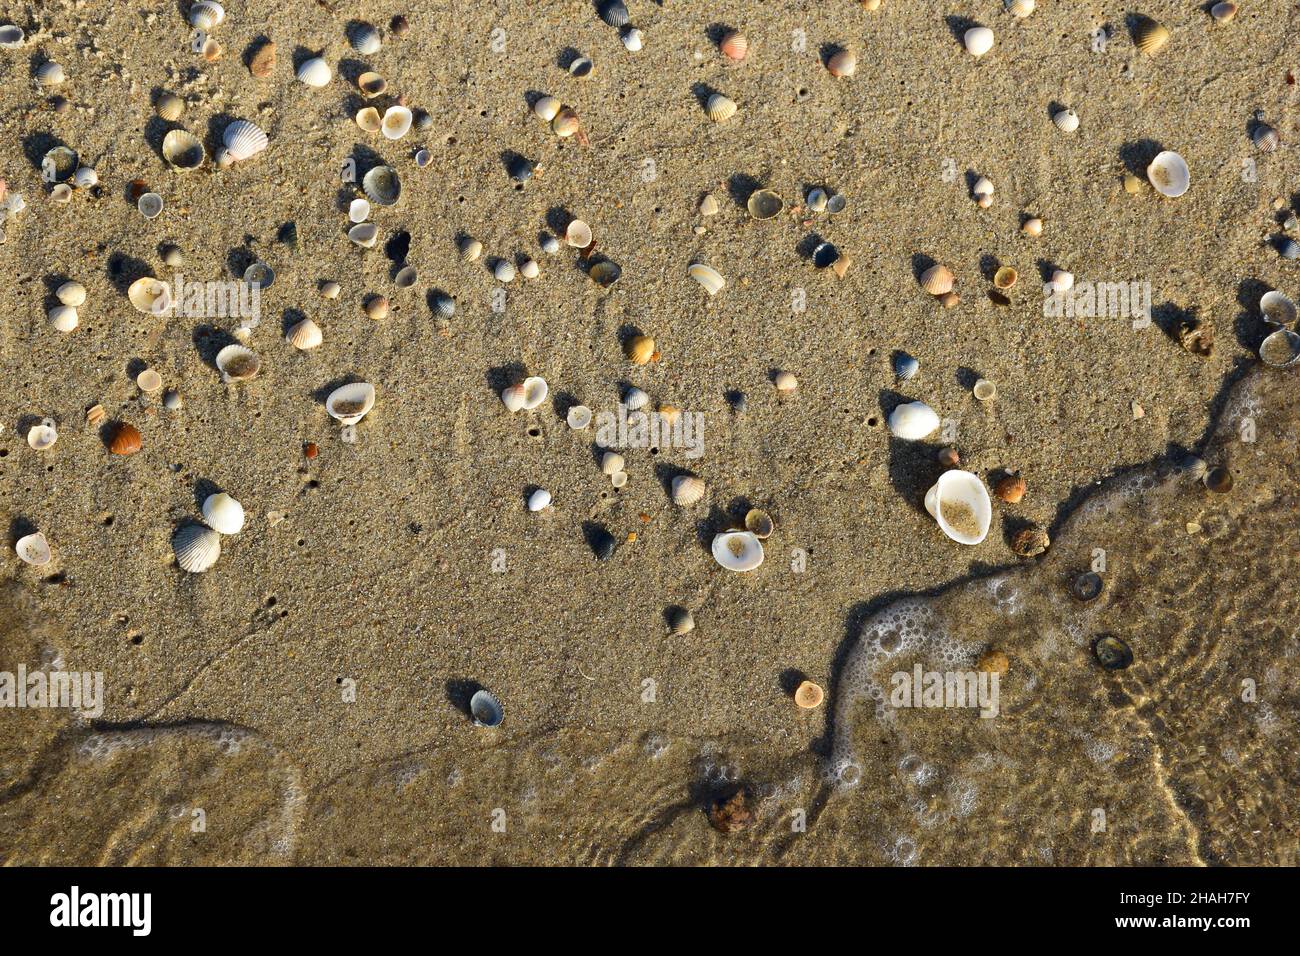 There are many colorful small seashells on the sandy seashore. At the bottom of the frame is a foamy wave. Stock Photo